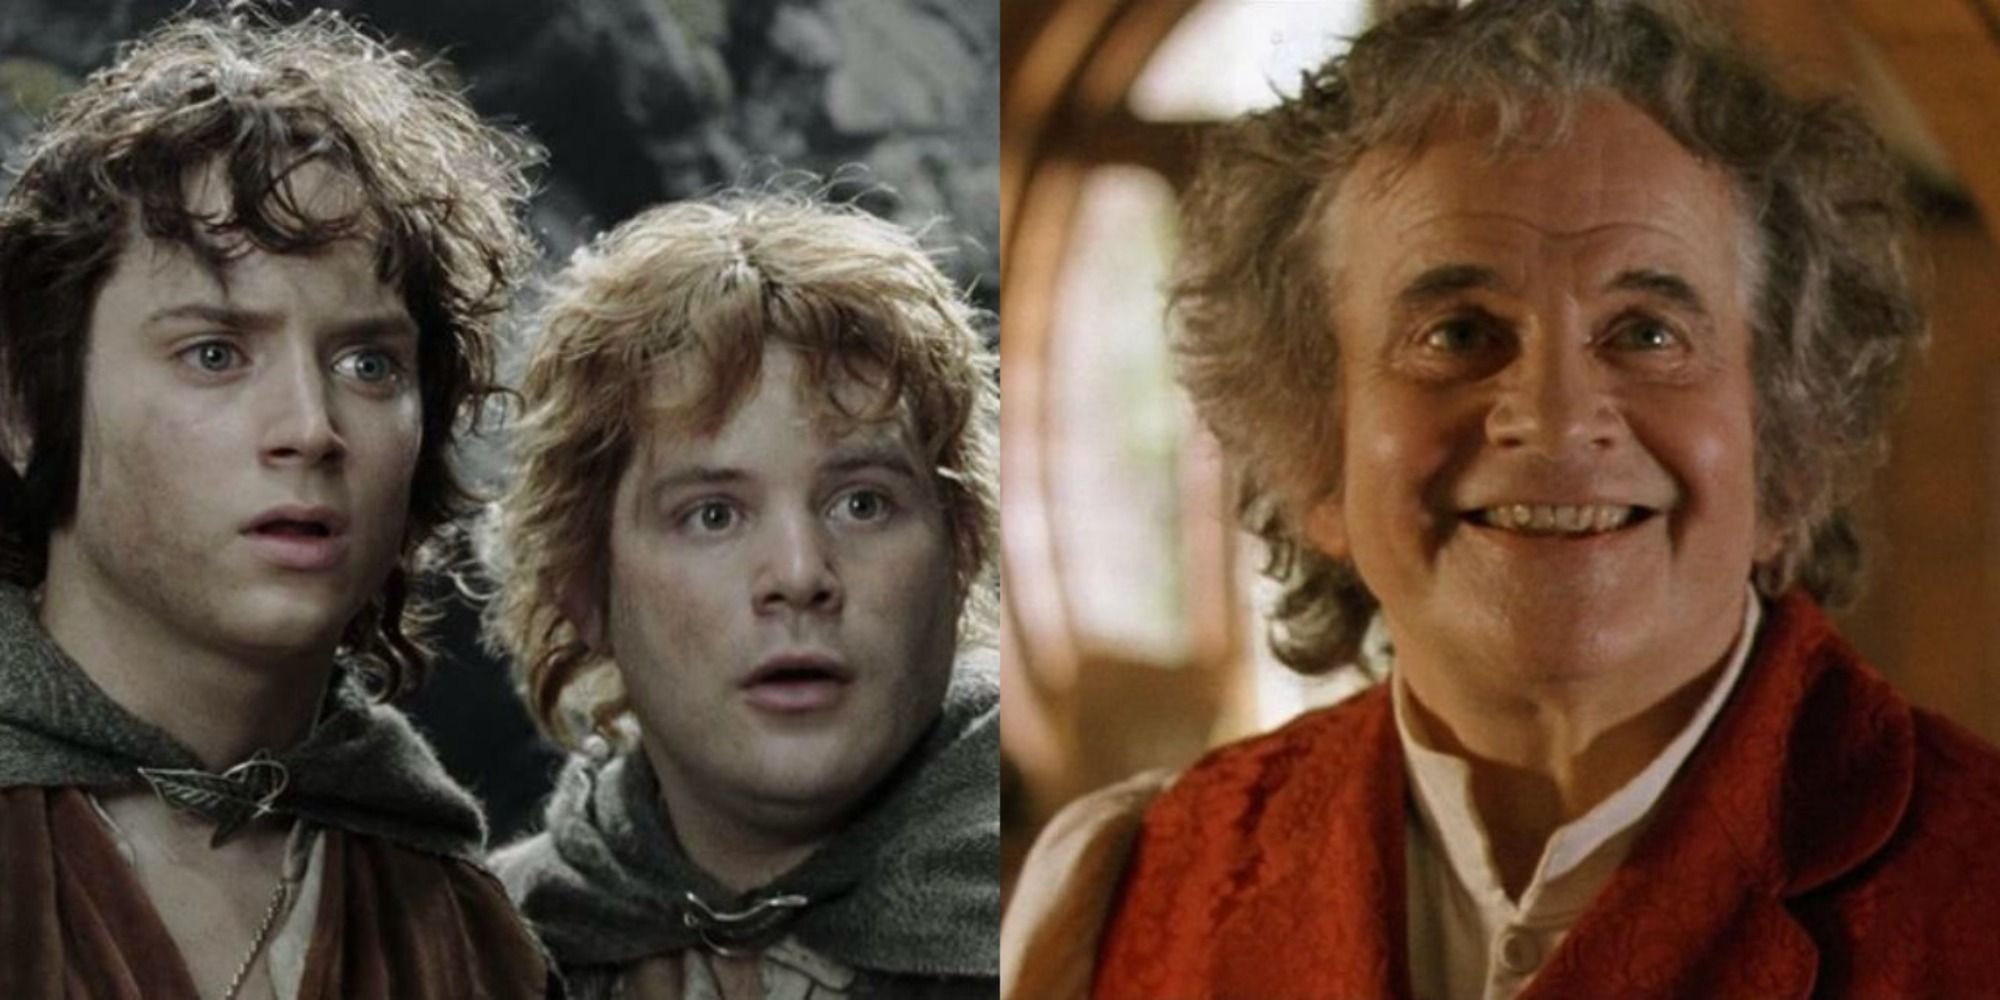 A split image of Frodo and Sam looking shocked and Bilbo laughing in LOTR